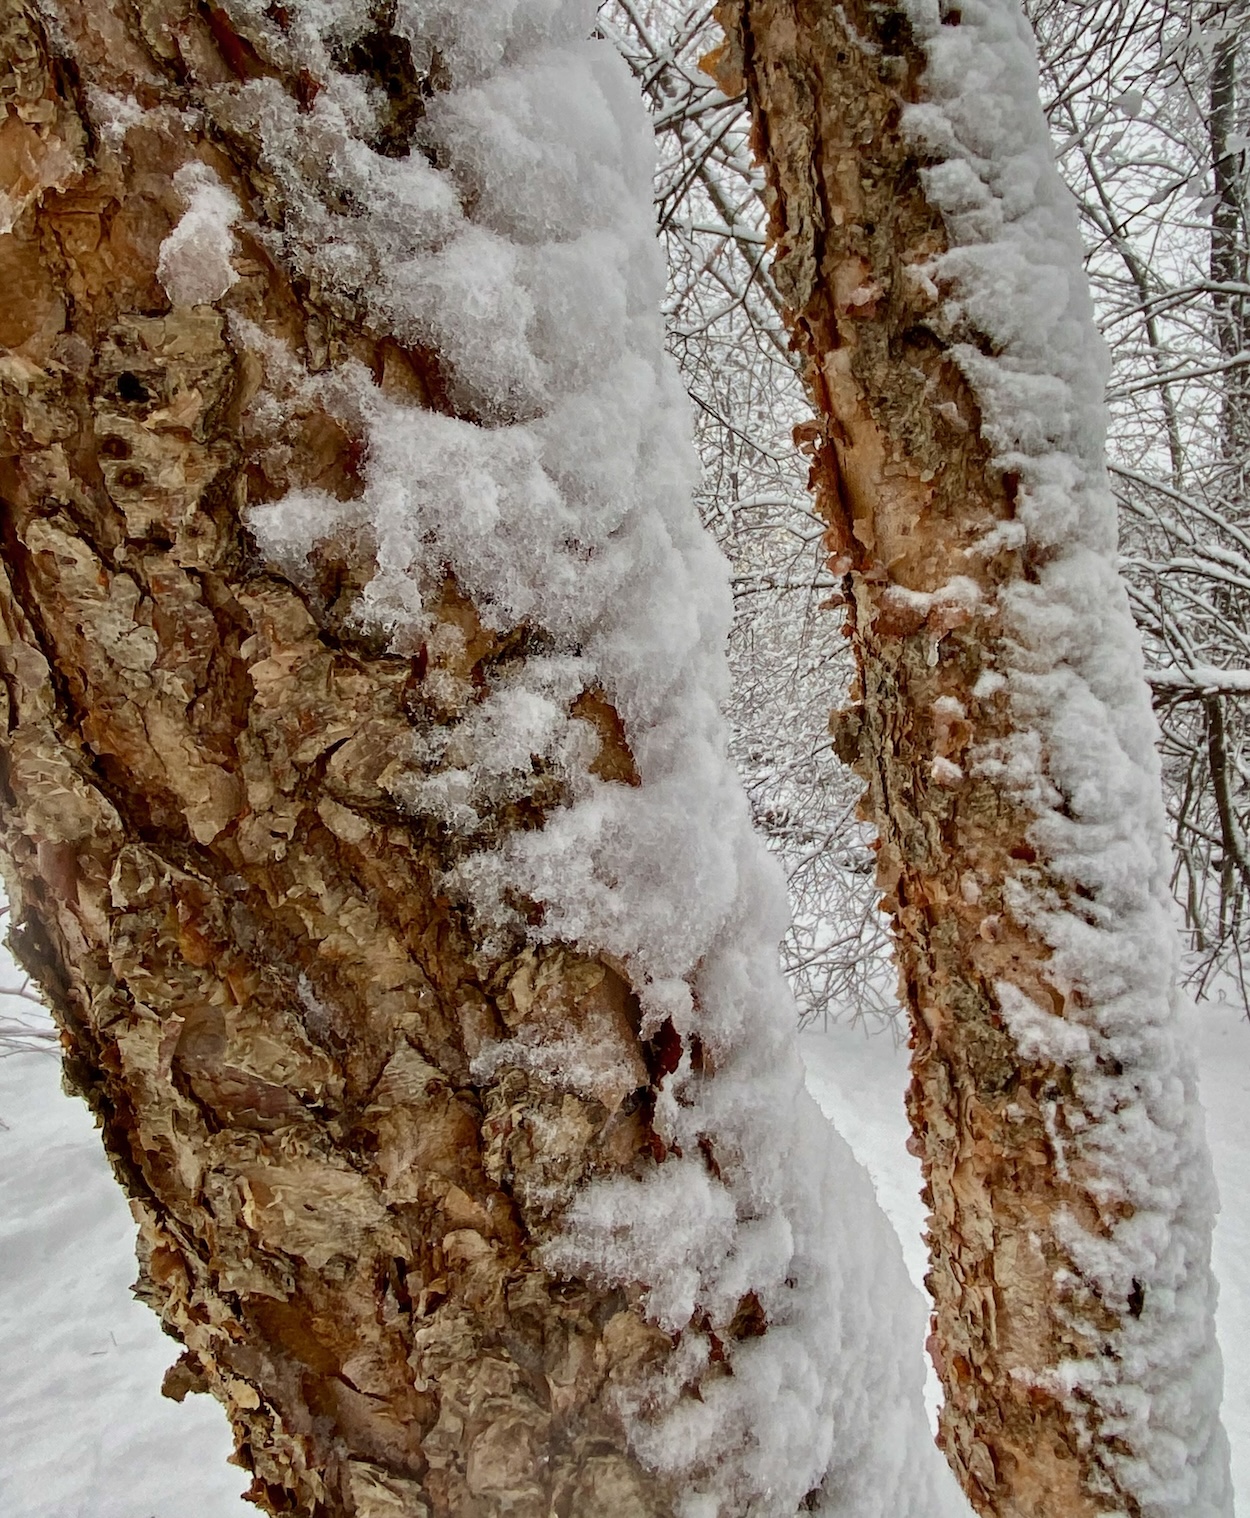 River Birch Trunks with Snow on One Side